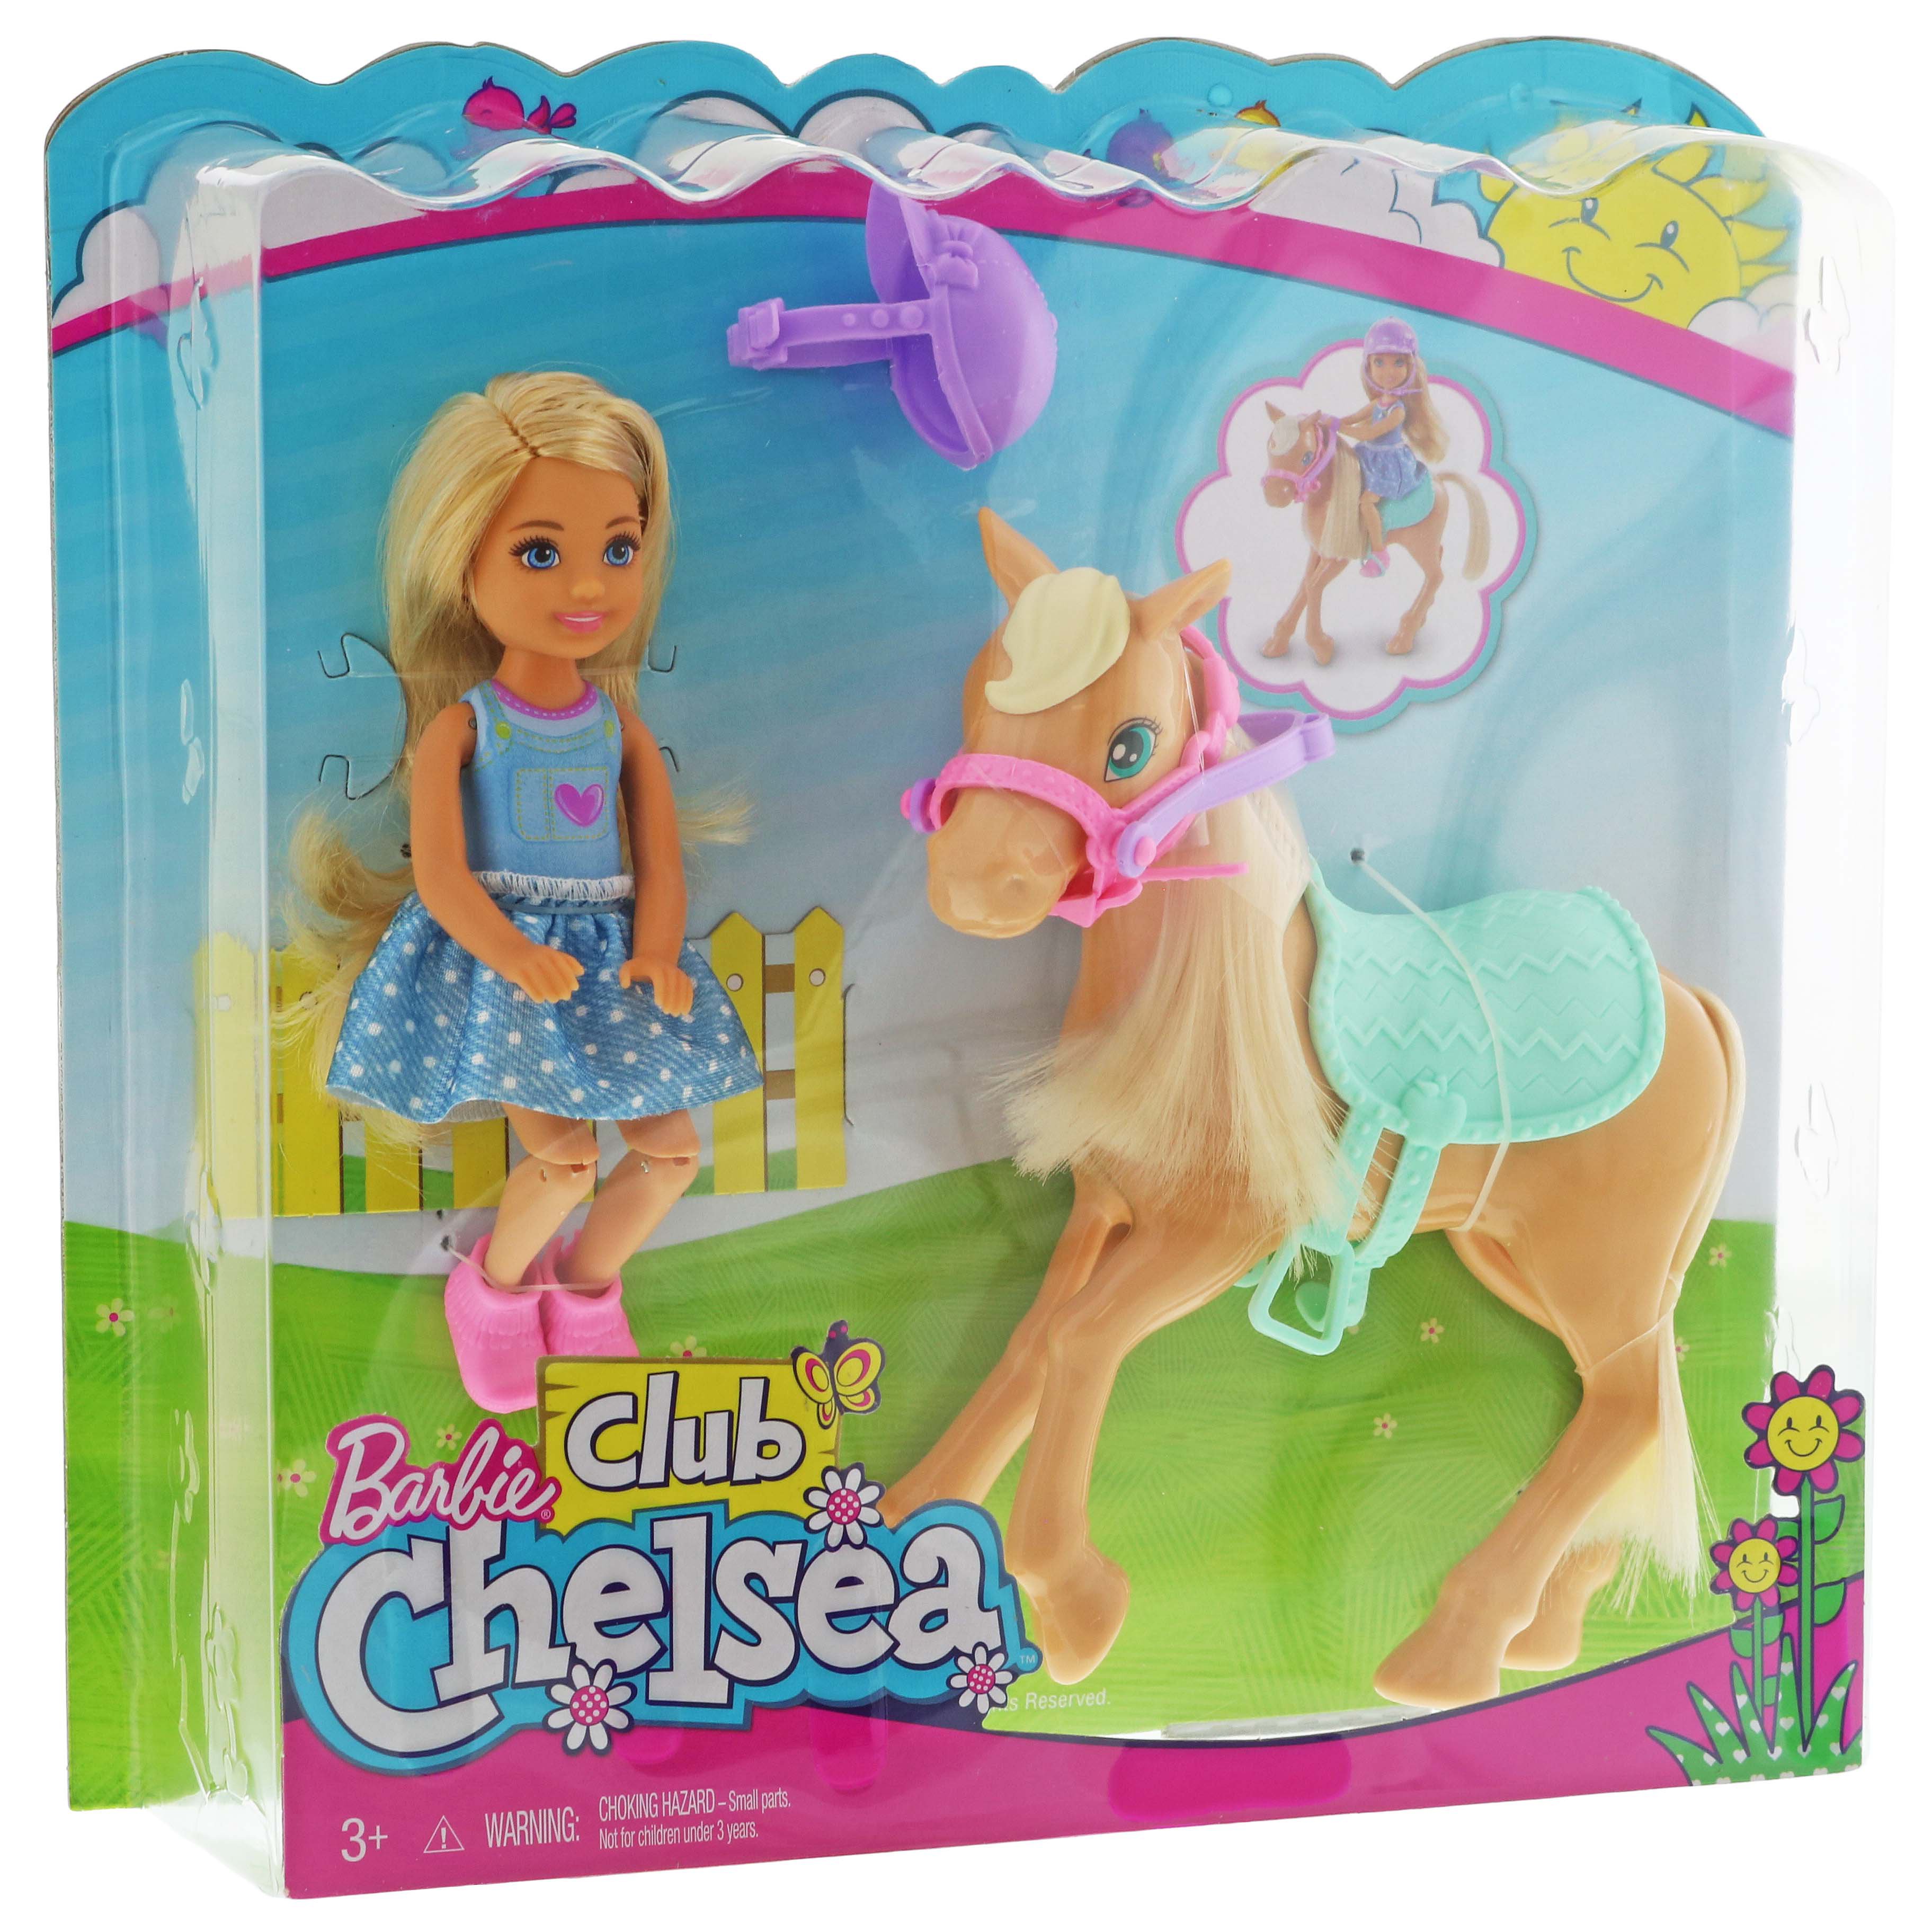 Barbie Club Chelsea Doll Playset Shop Action Figures Dolls At H E B